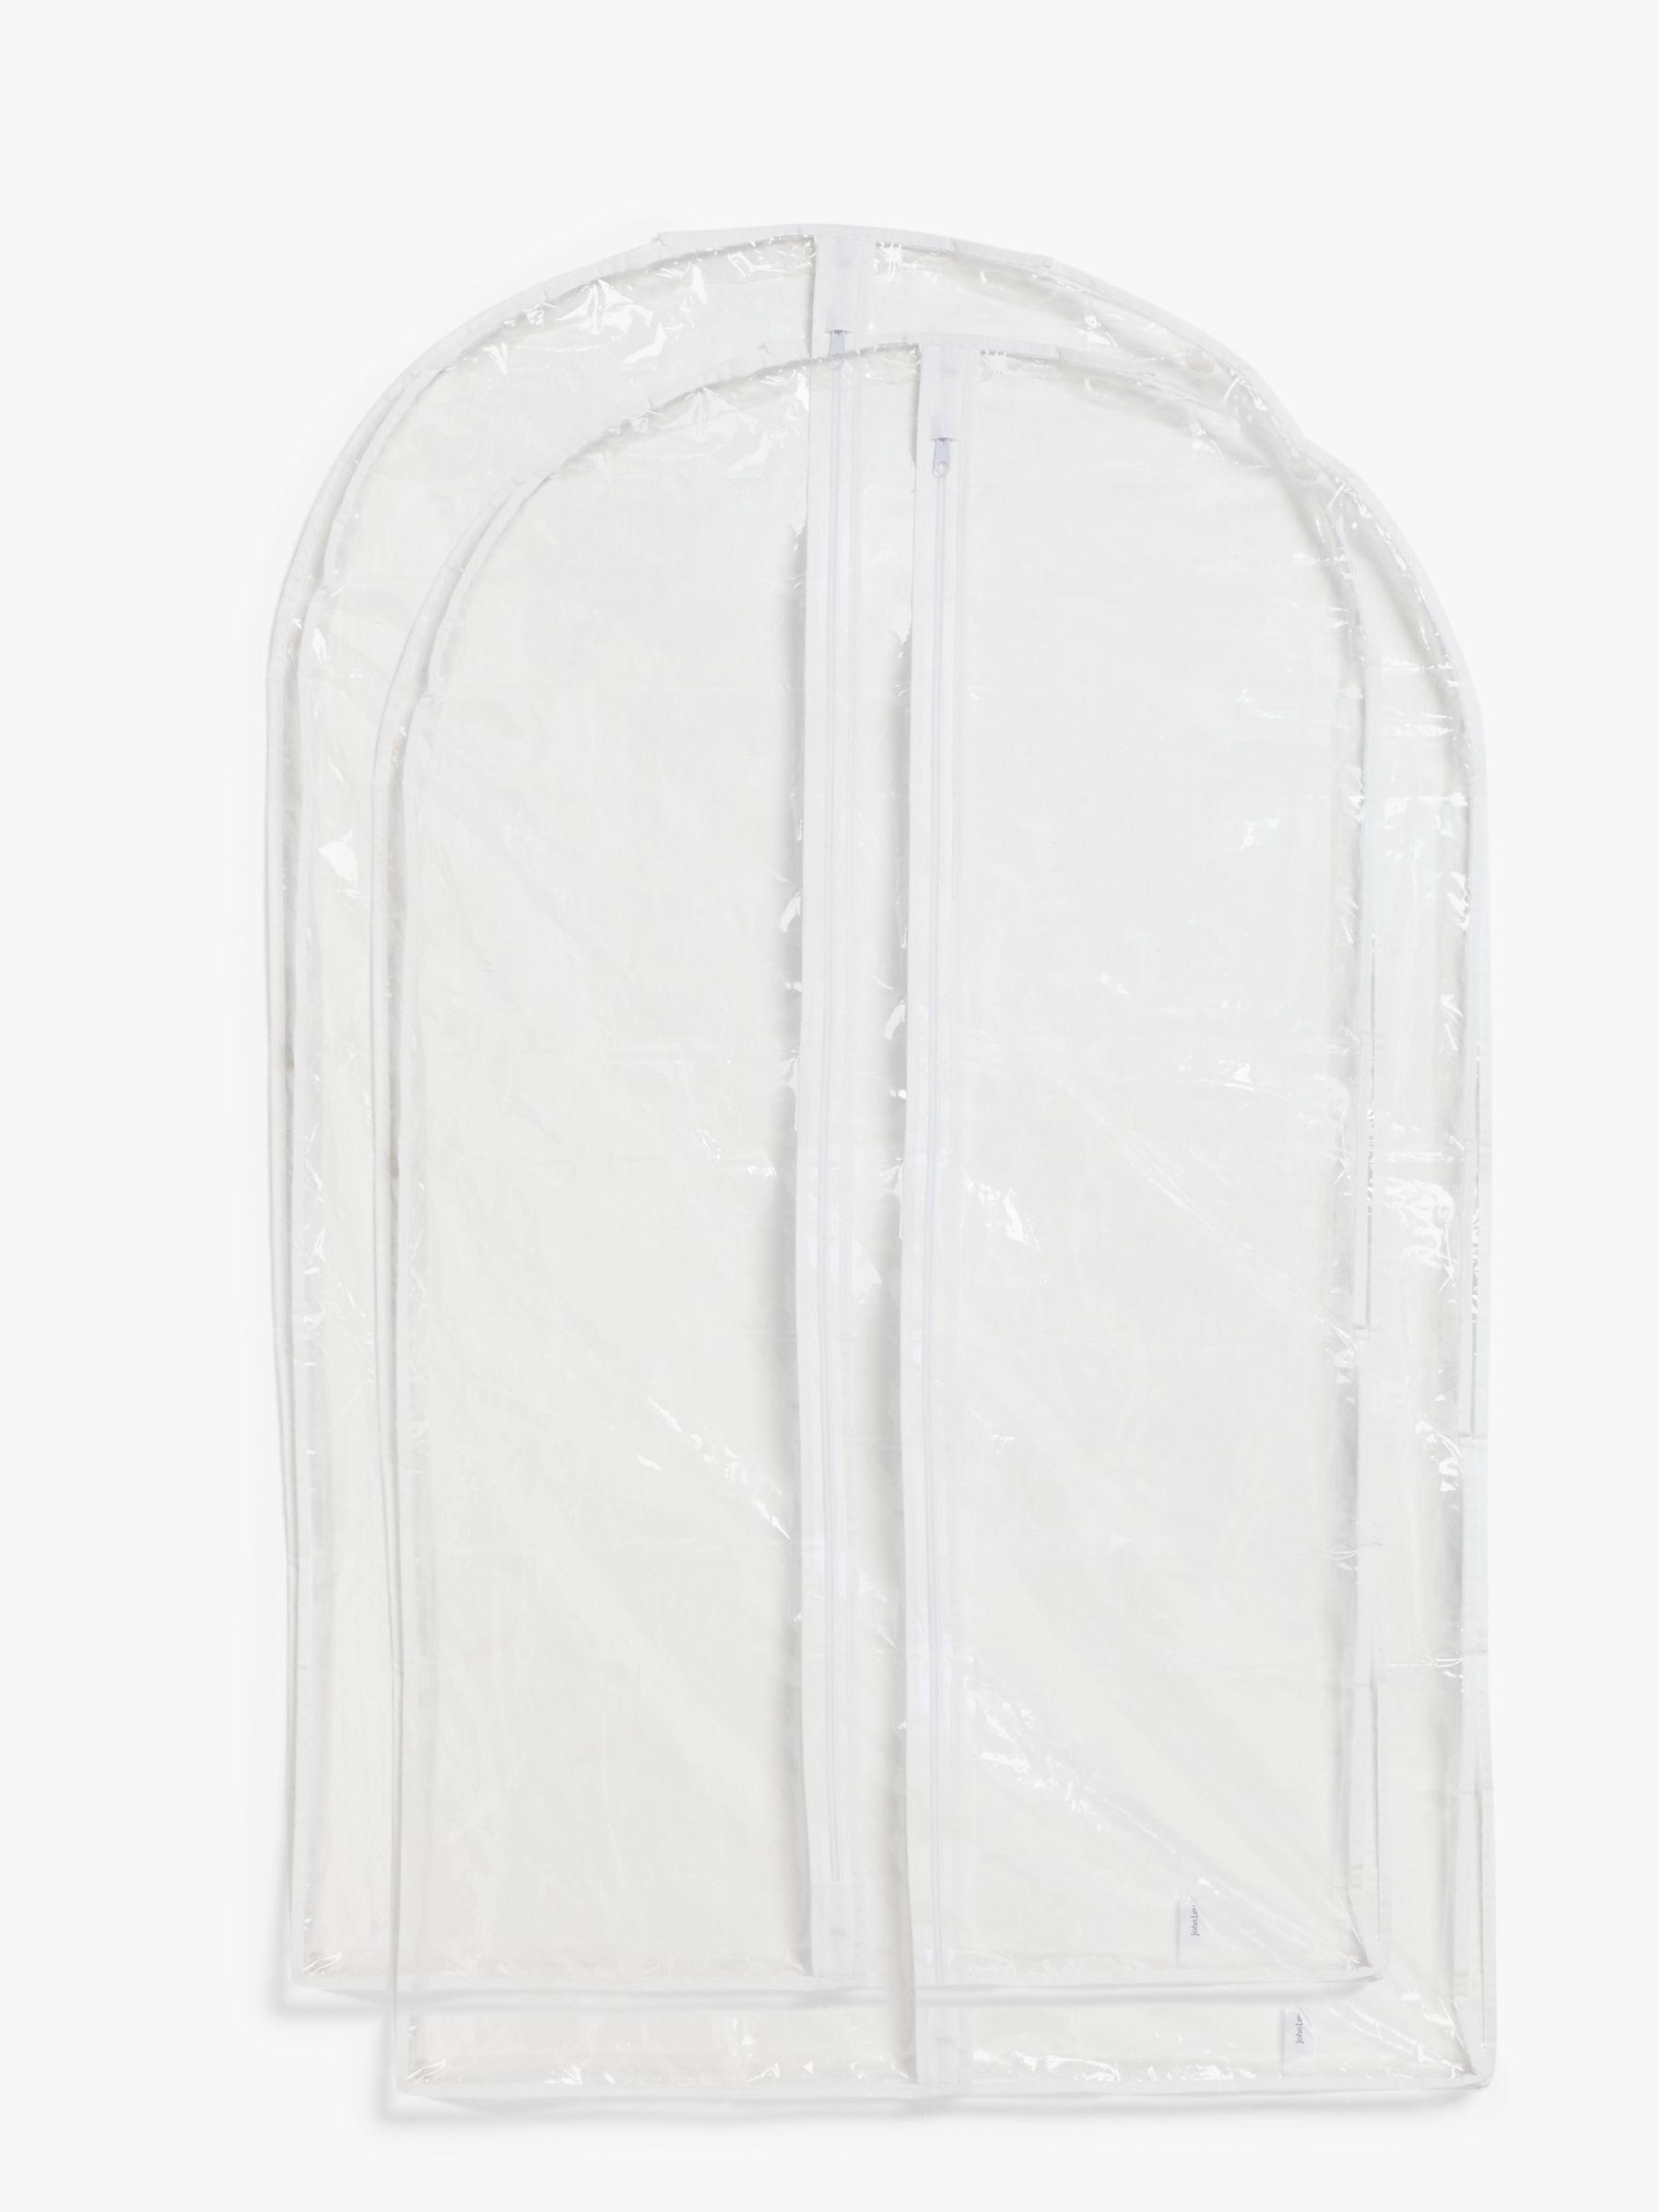 John Lewis Short Transparent Clothes Cover, Pack of 2